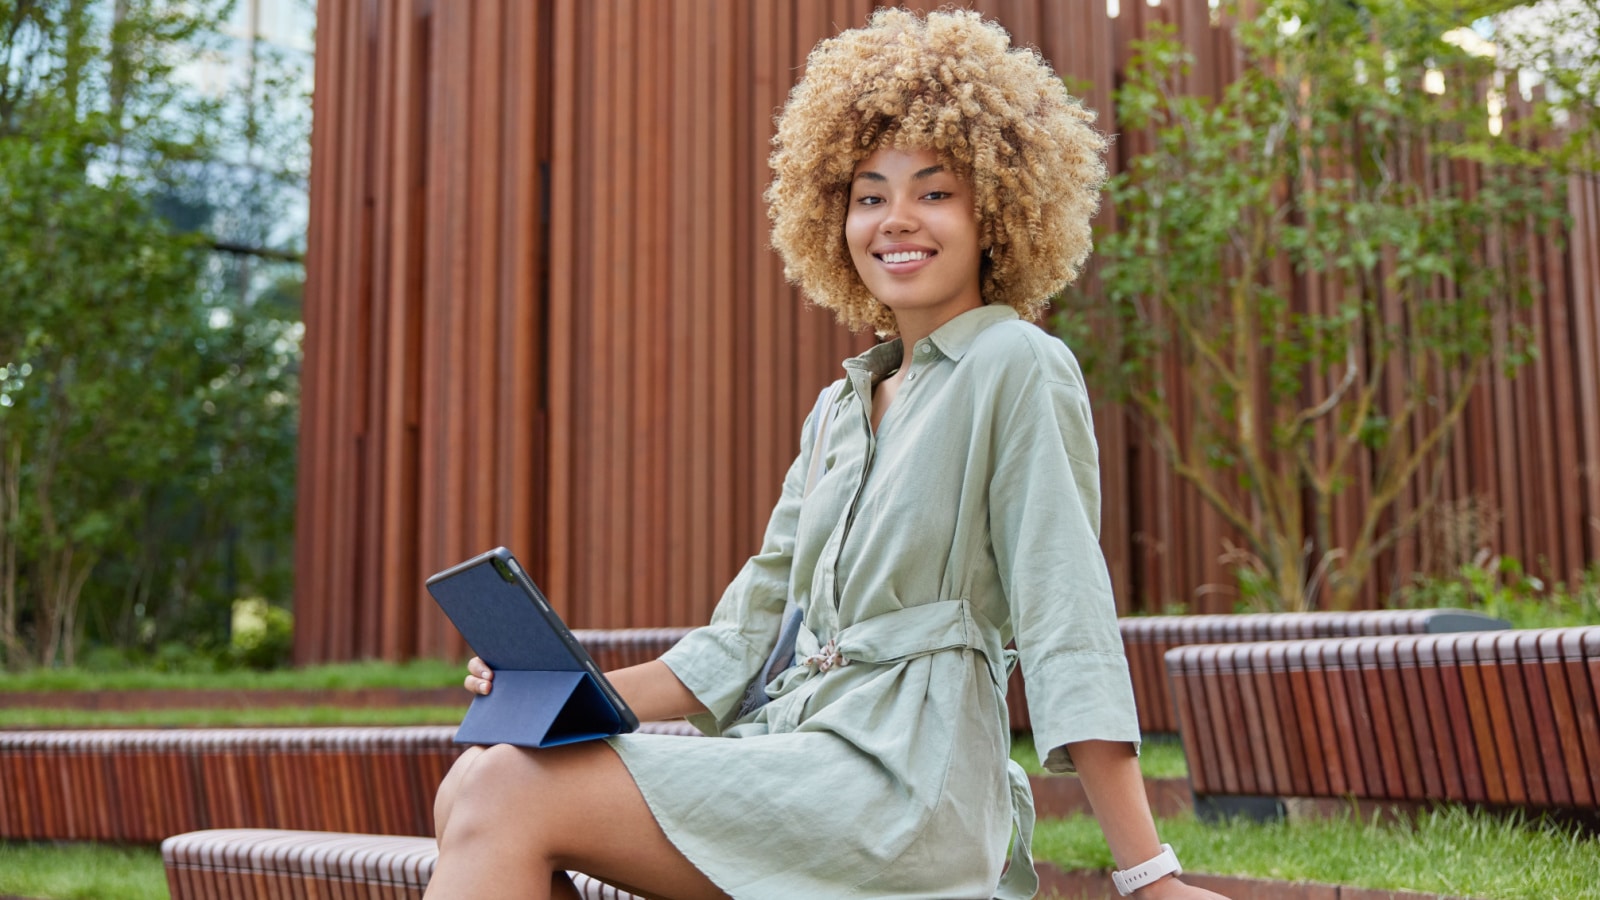 Cheerful beautiful woman wears linen dress uses modern digital tablet for reading book or browsing web pages sits outdoors on wooden bench has happy expression. Modern technologies and lifestyle